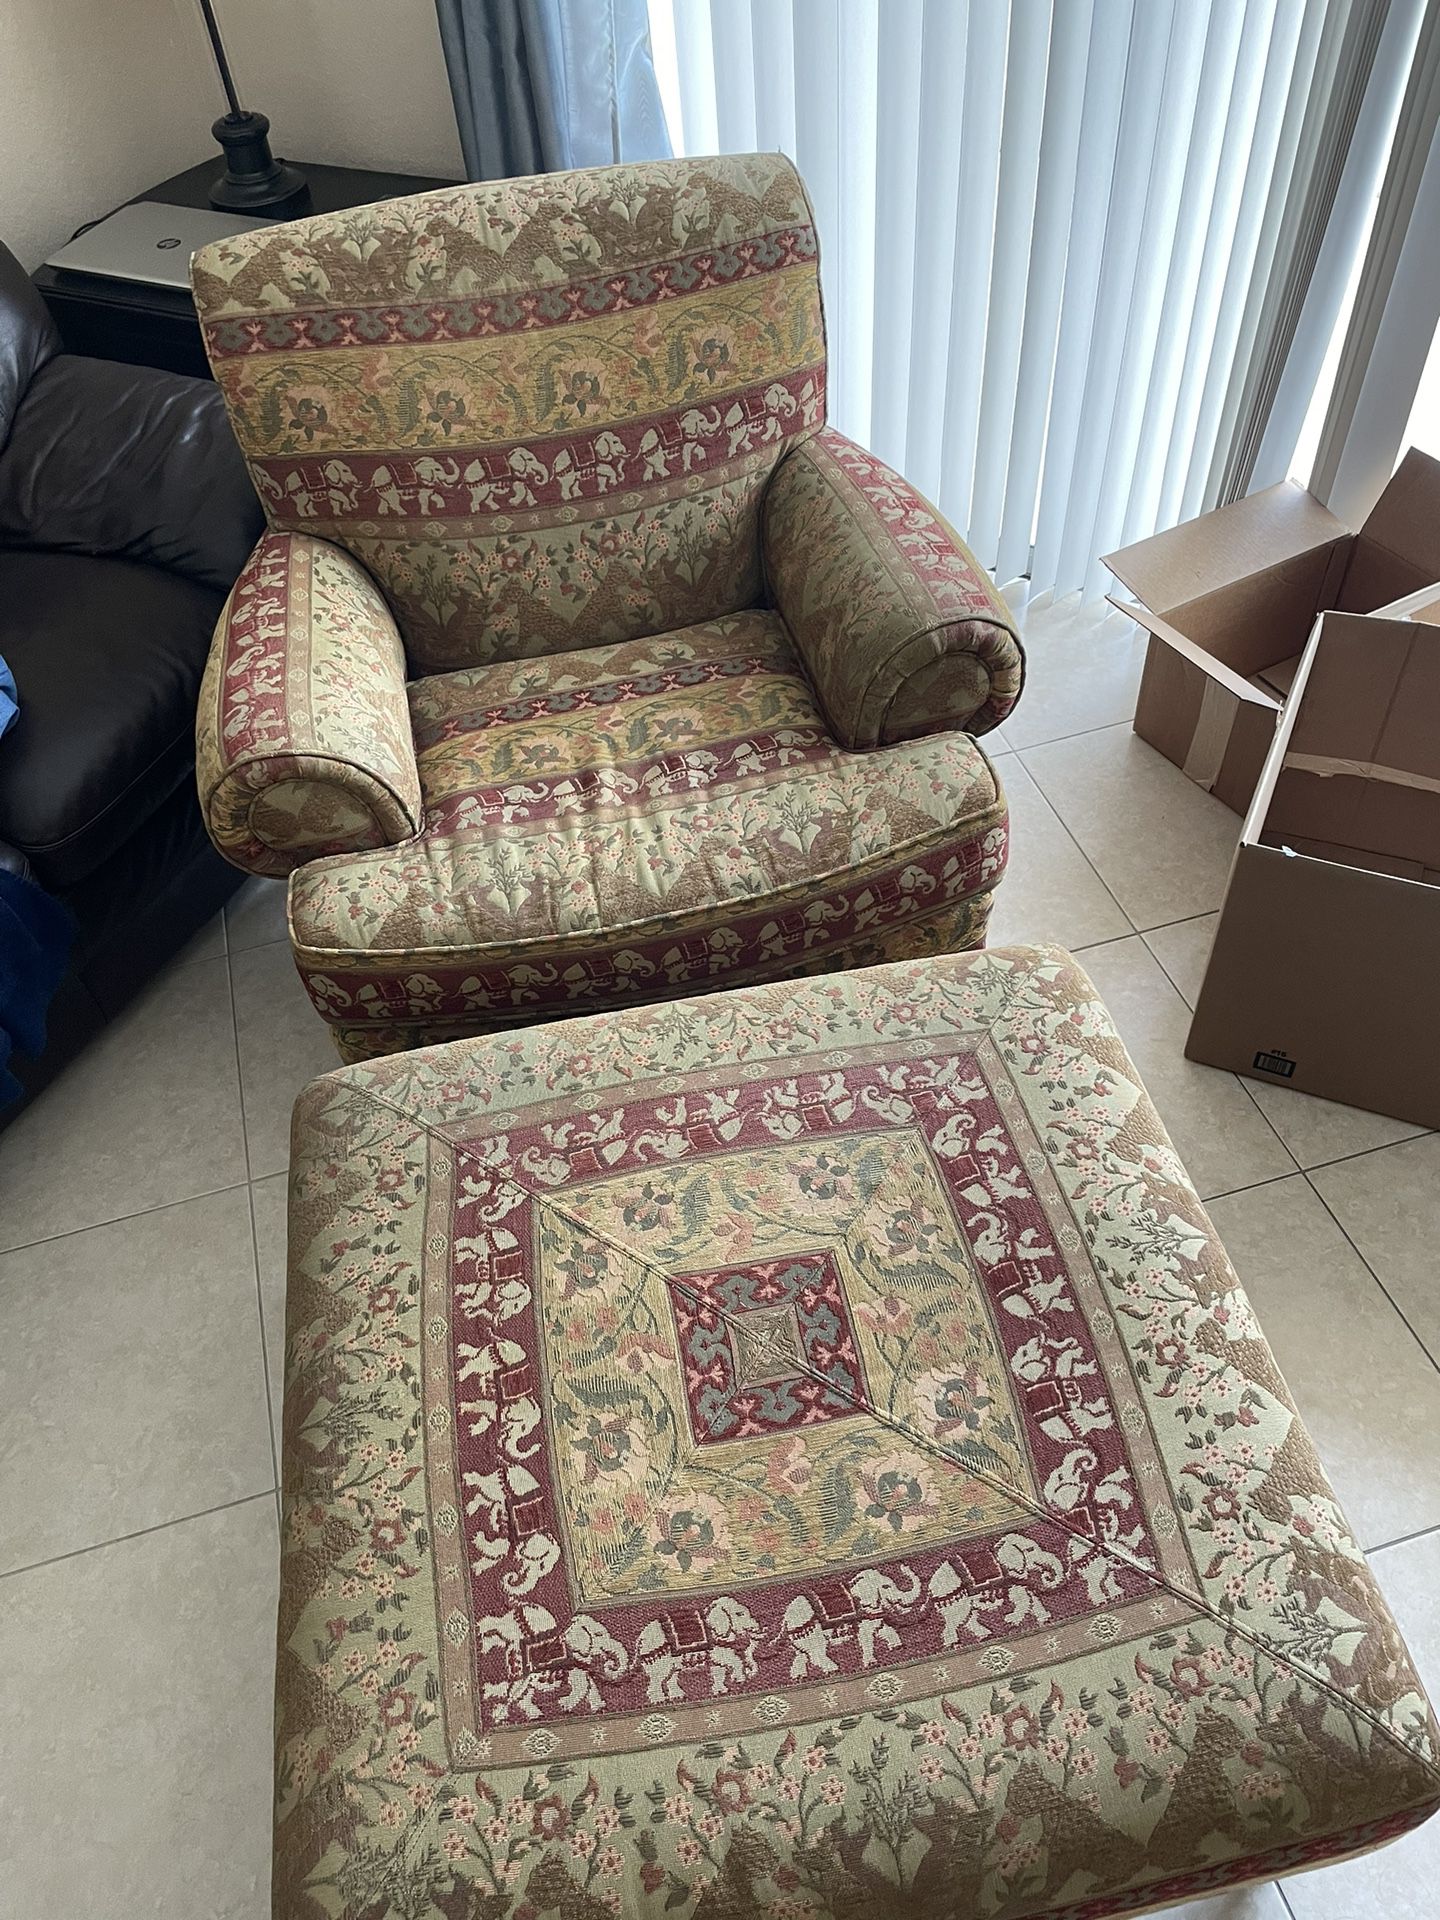 Large Chair And Ottoman